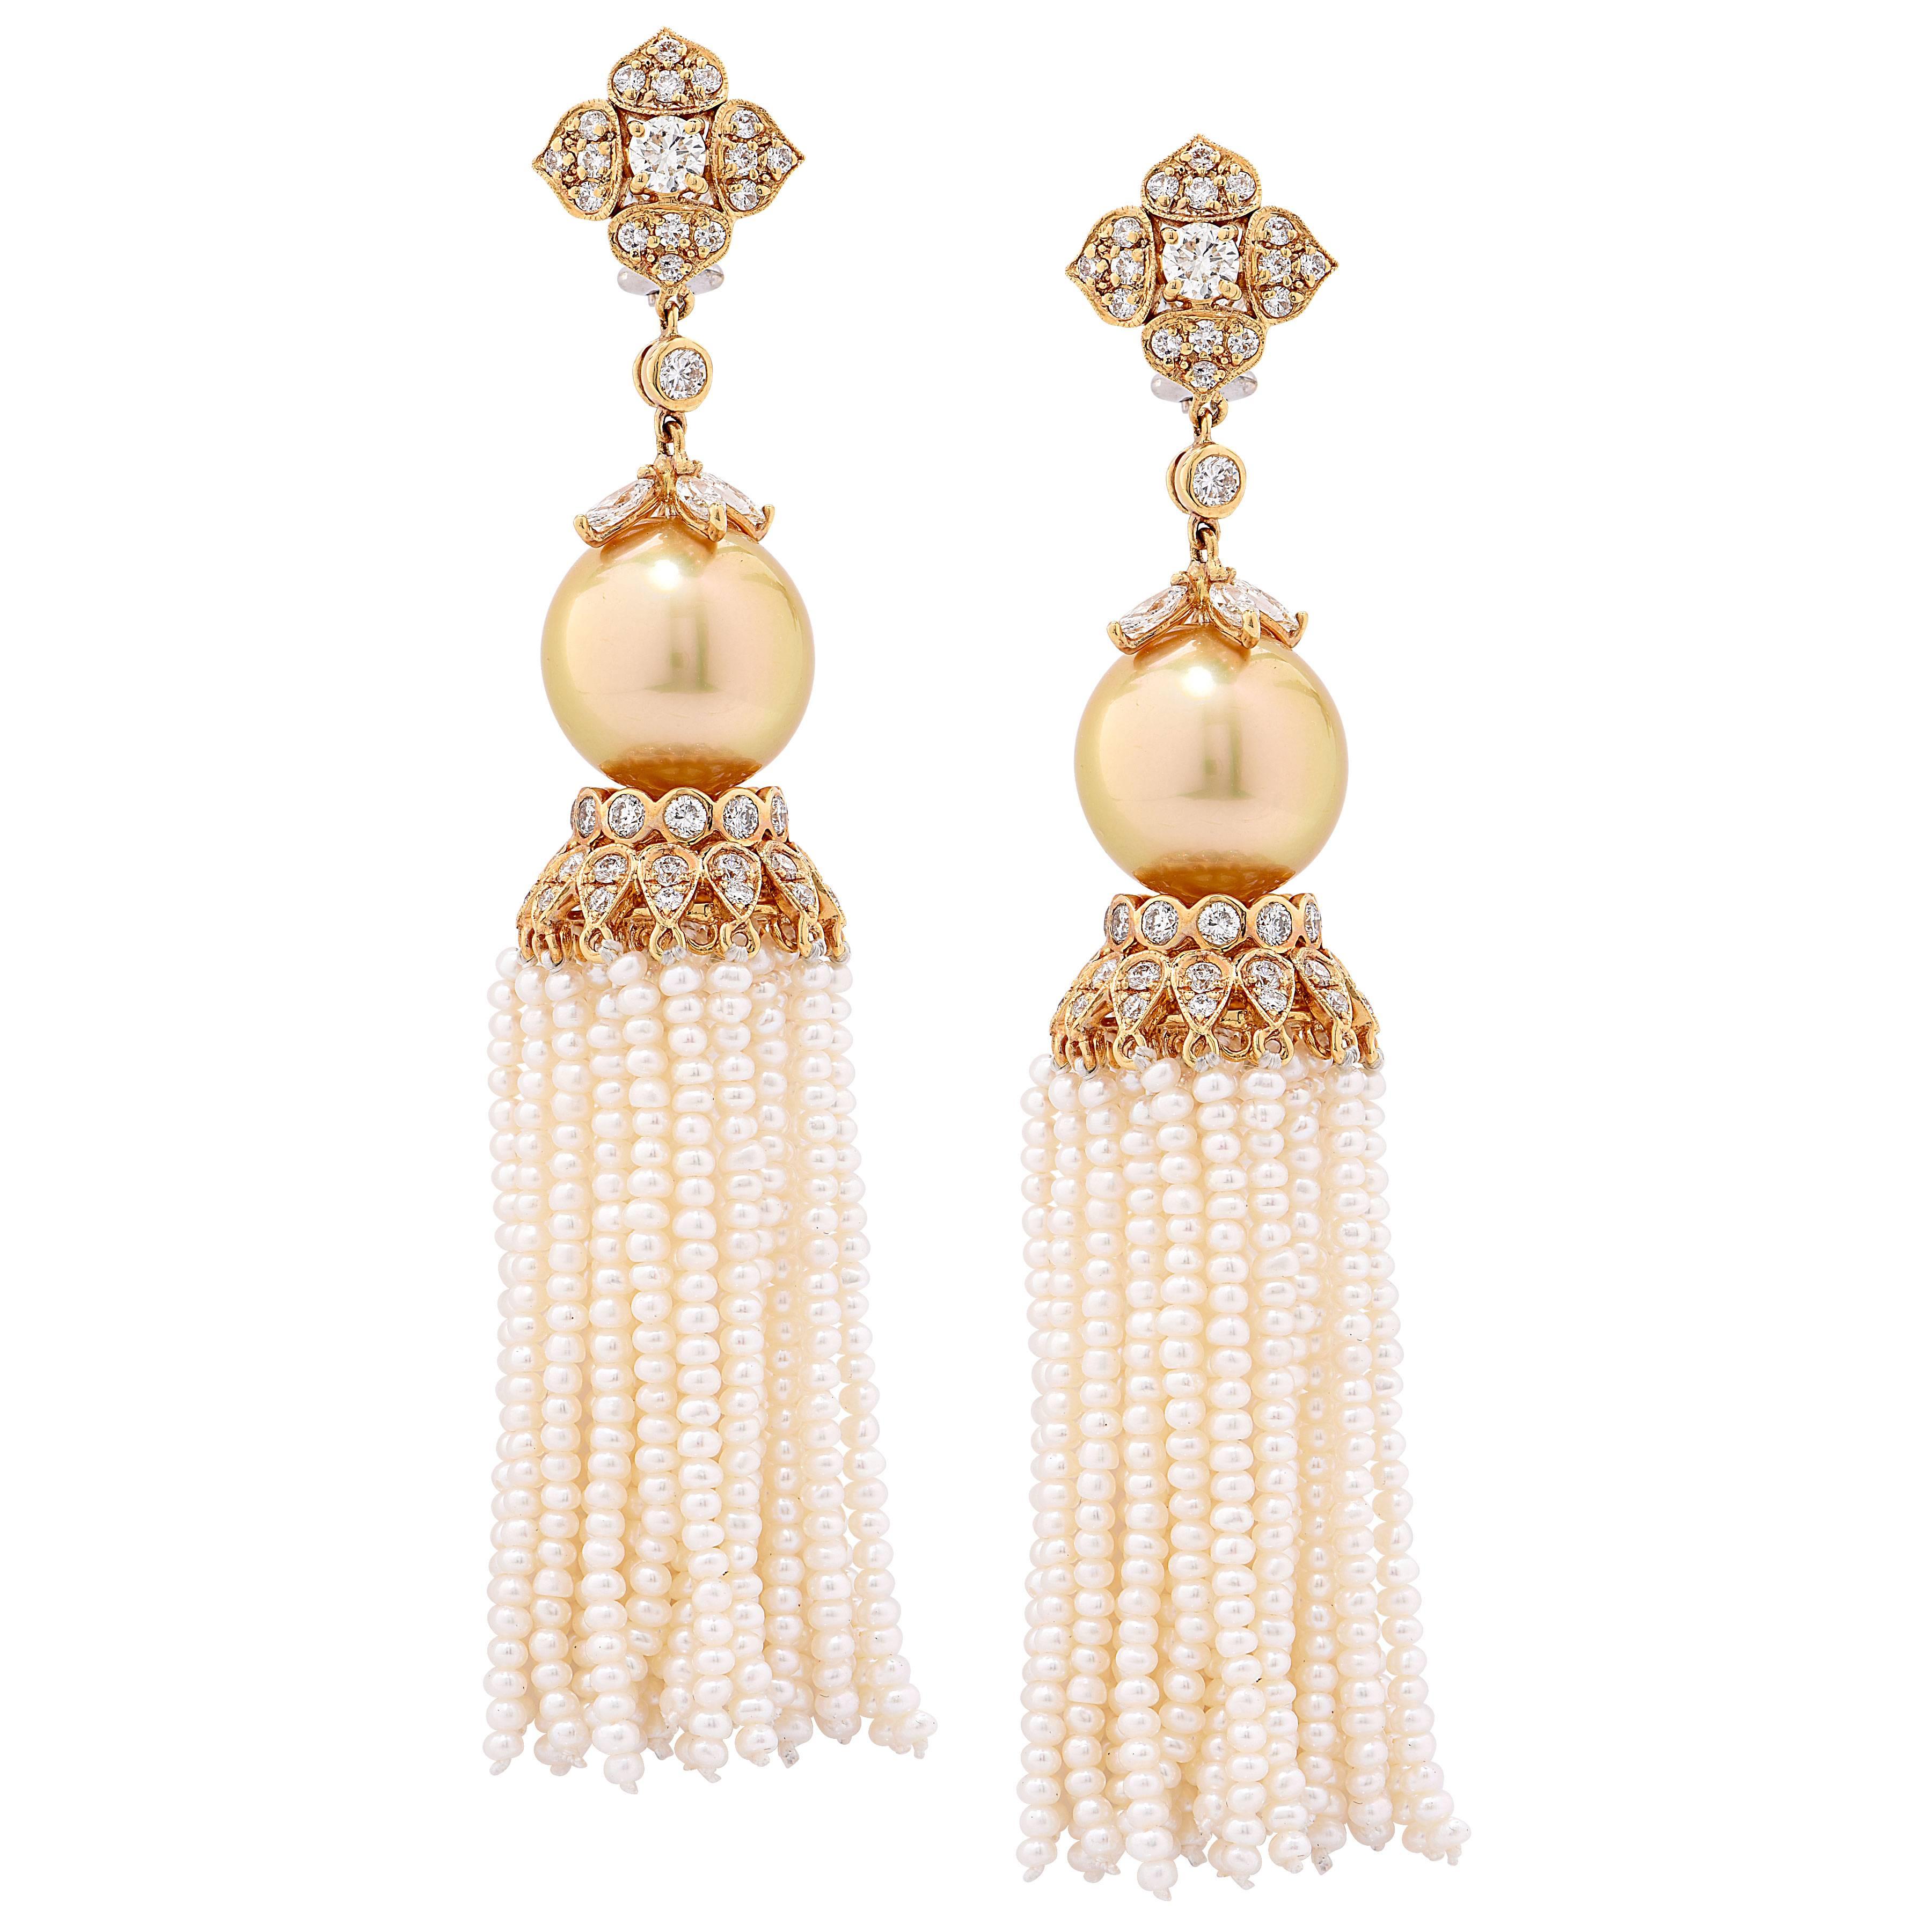 4.05 Carat Diamond and Golden South Sea Pearl Ear Clips with Removable Tassel For Sale